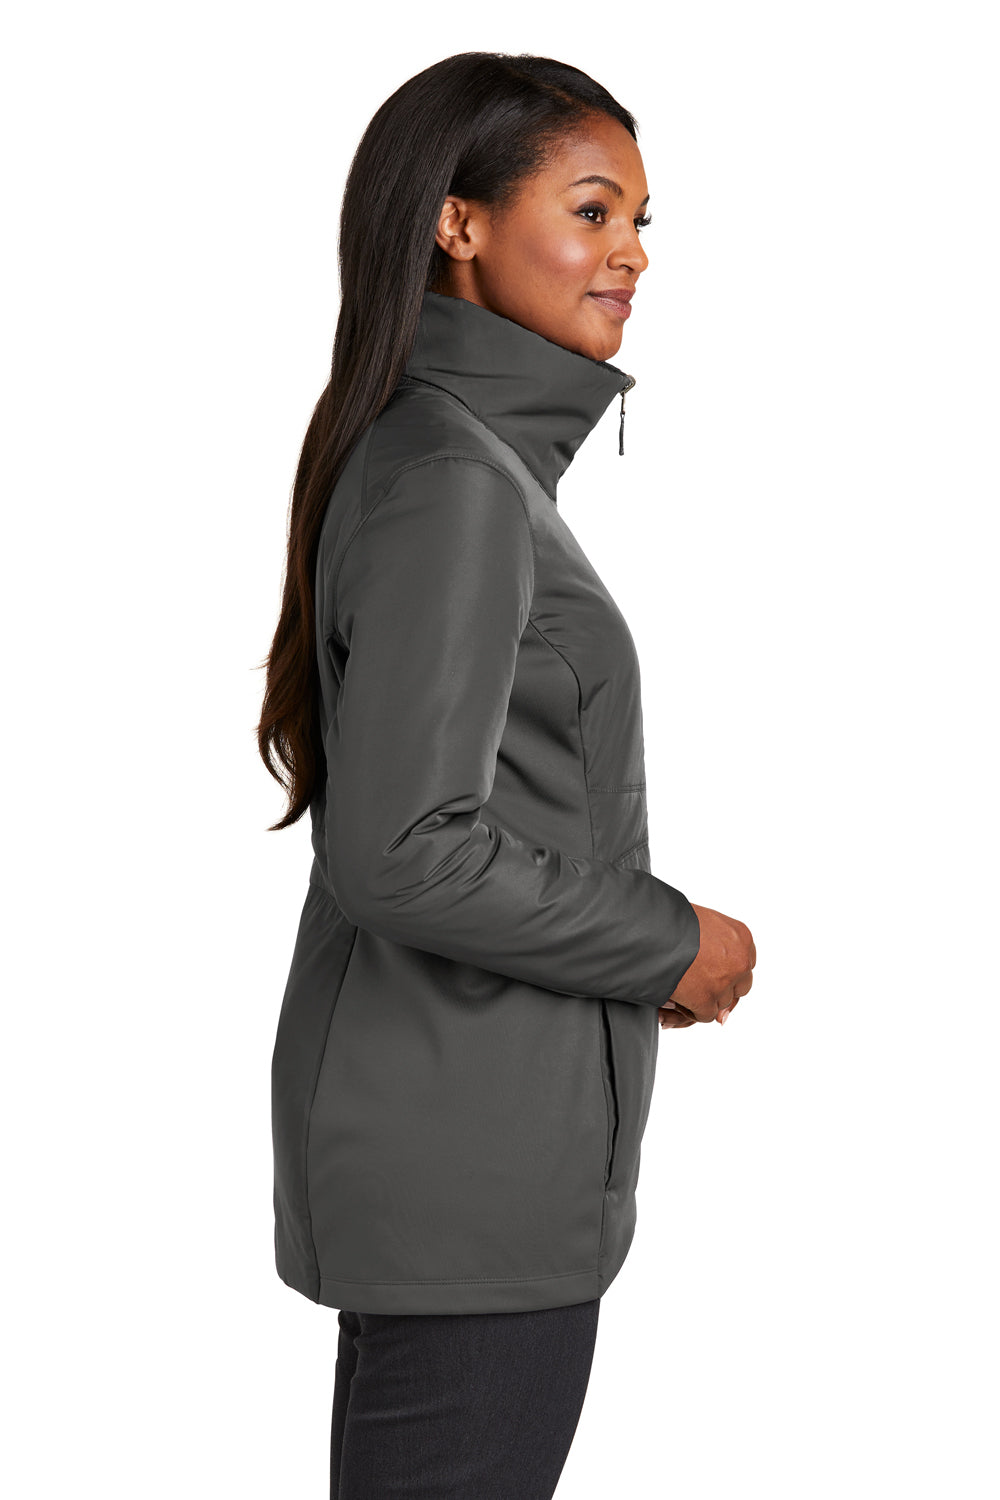 Port Authority L902 Womens Collective Wind & Water Resistant Full Zip Jacket Graphite Grey Side